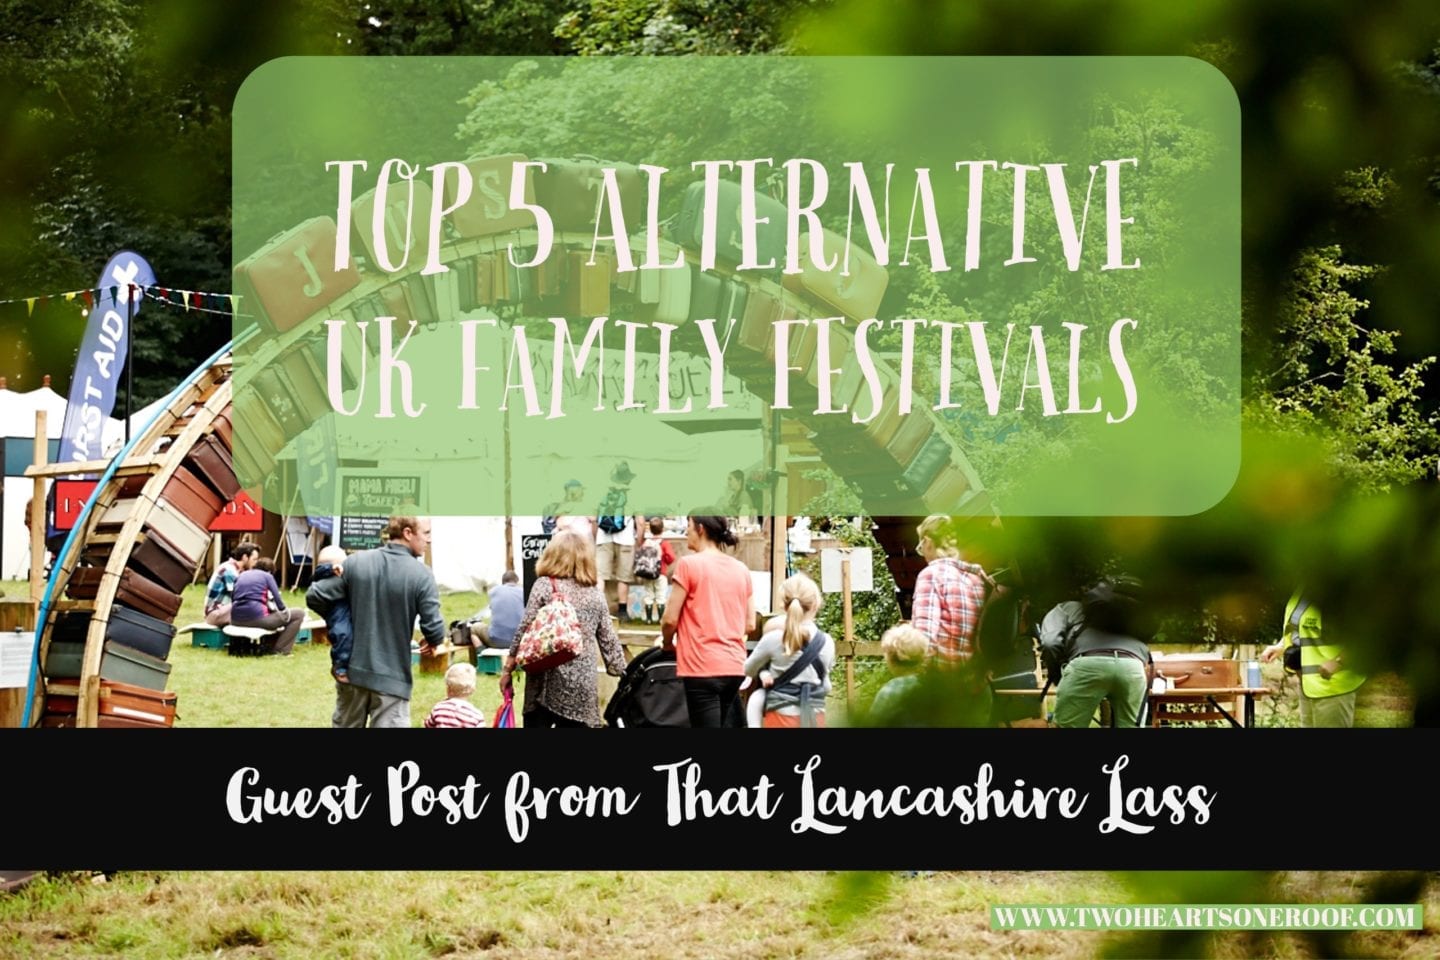 Guest Post from That Lancashire Lass – Top 5 Alternative UK Family Festivals